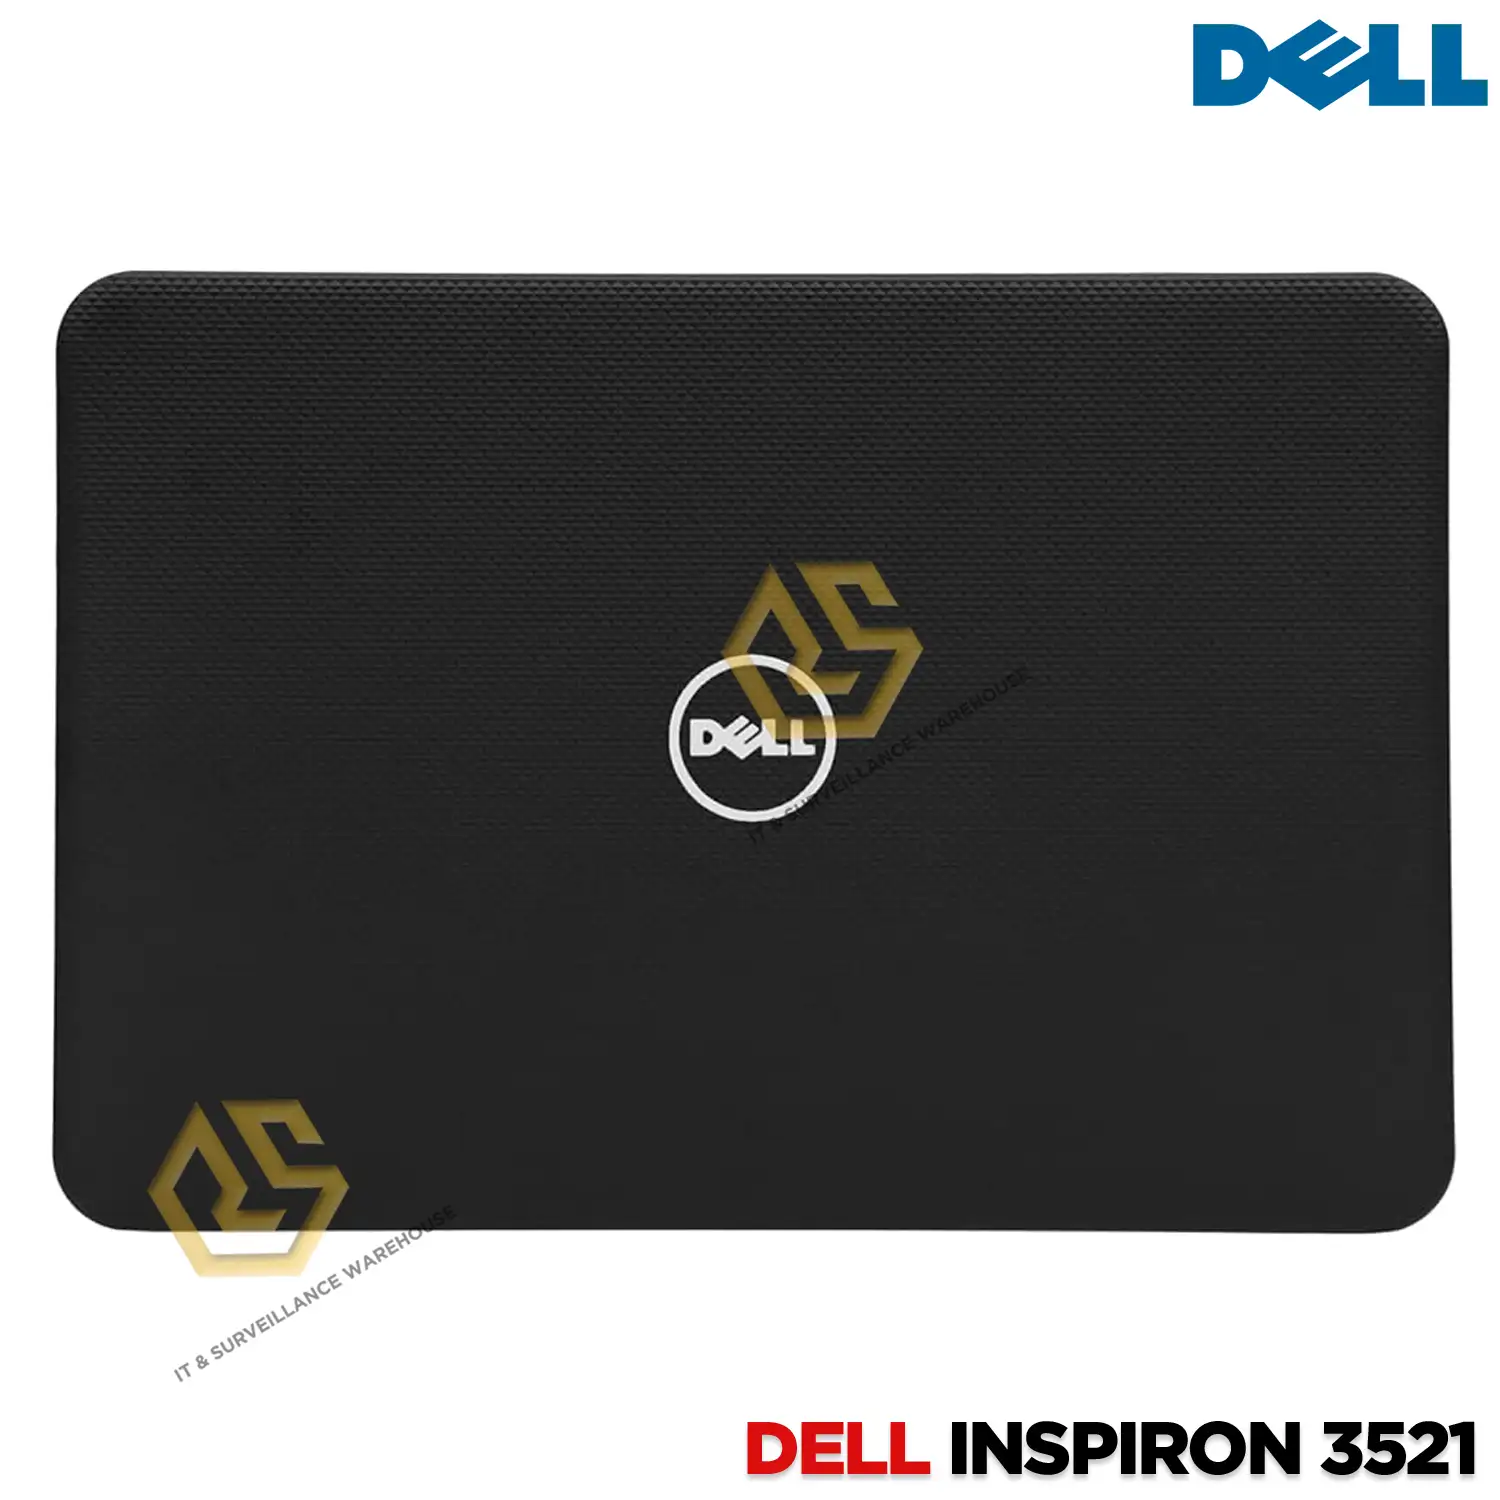 LAPTOP PANEL FOR DELL 3521